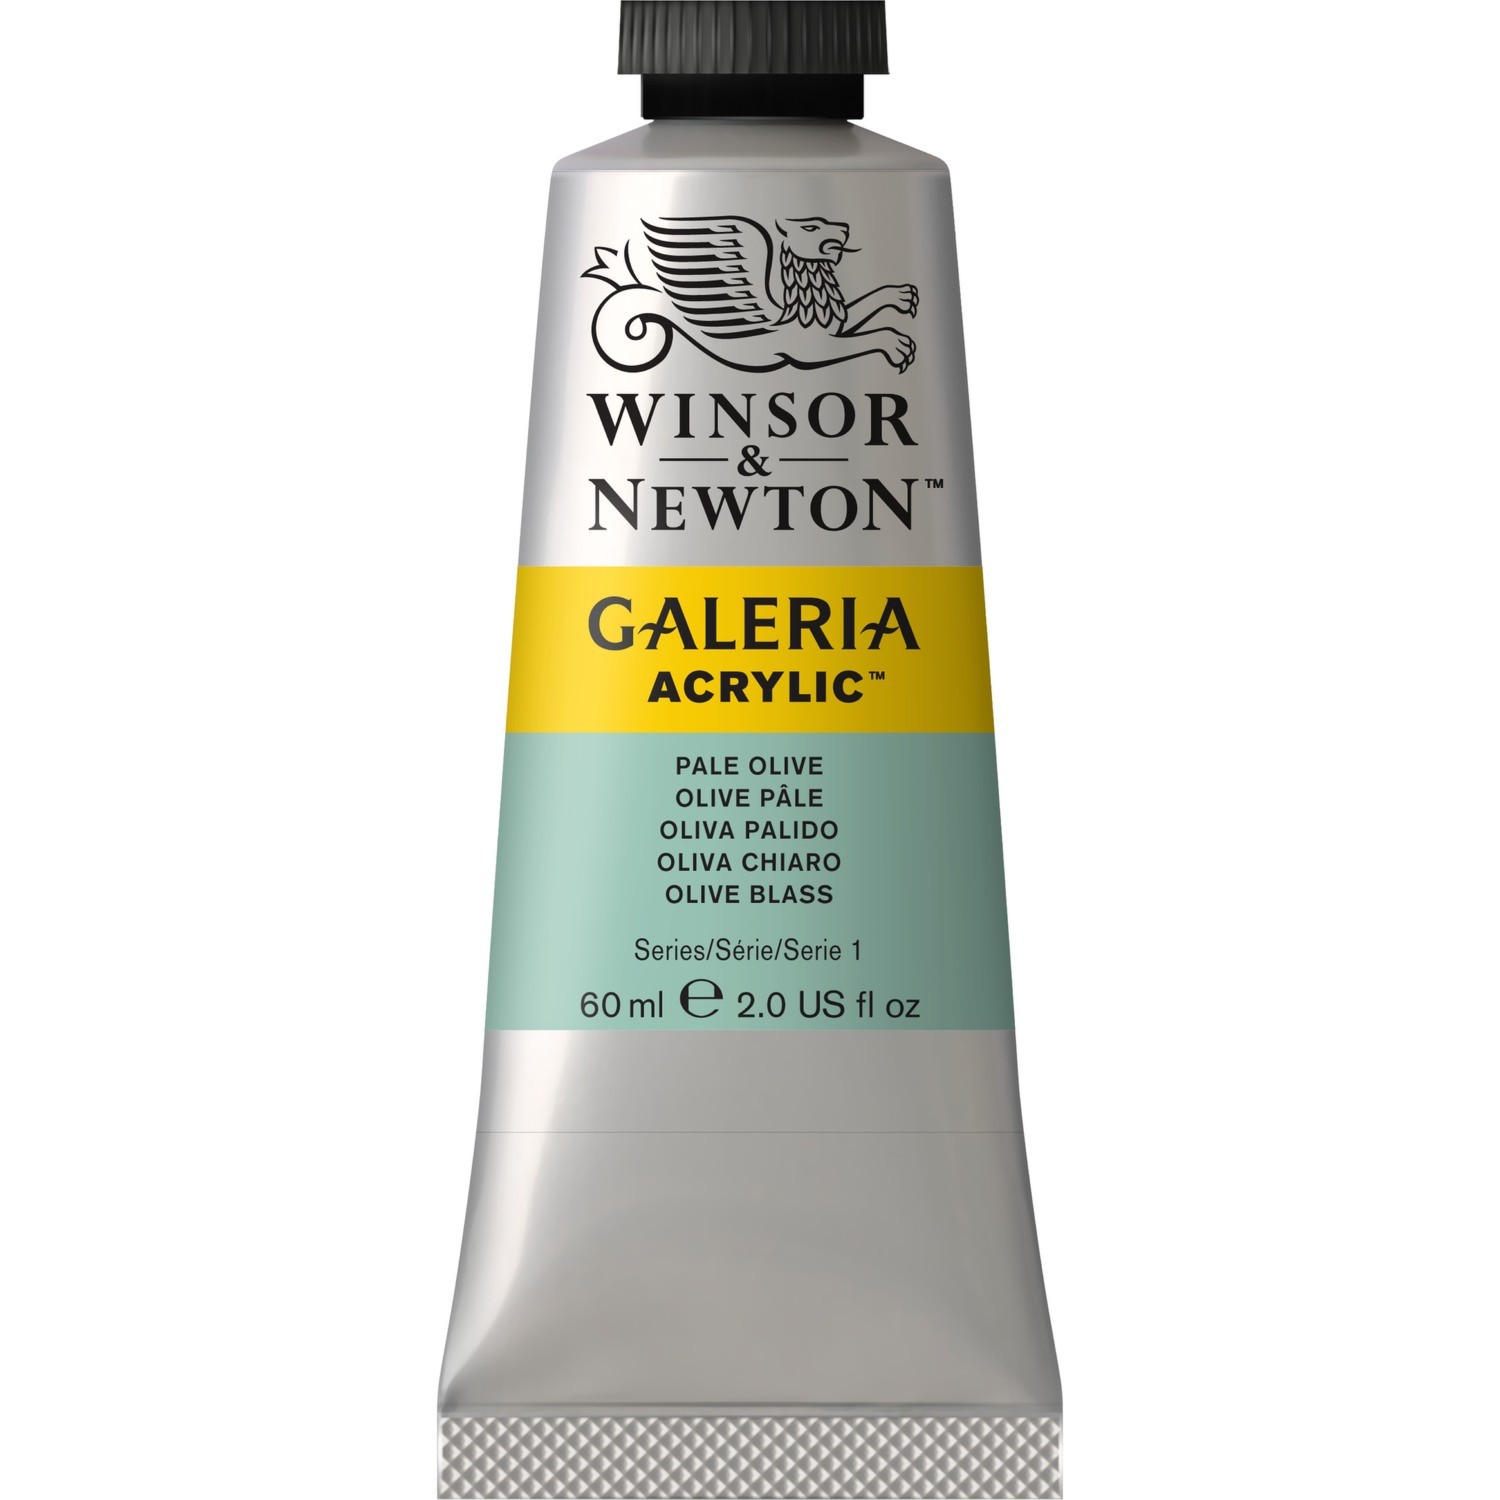 Winsor and Newton 60ml Galeria Acrylic Paint - Pale Olive Image 1